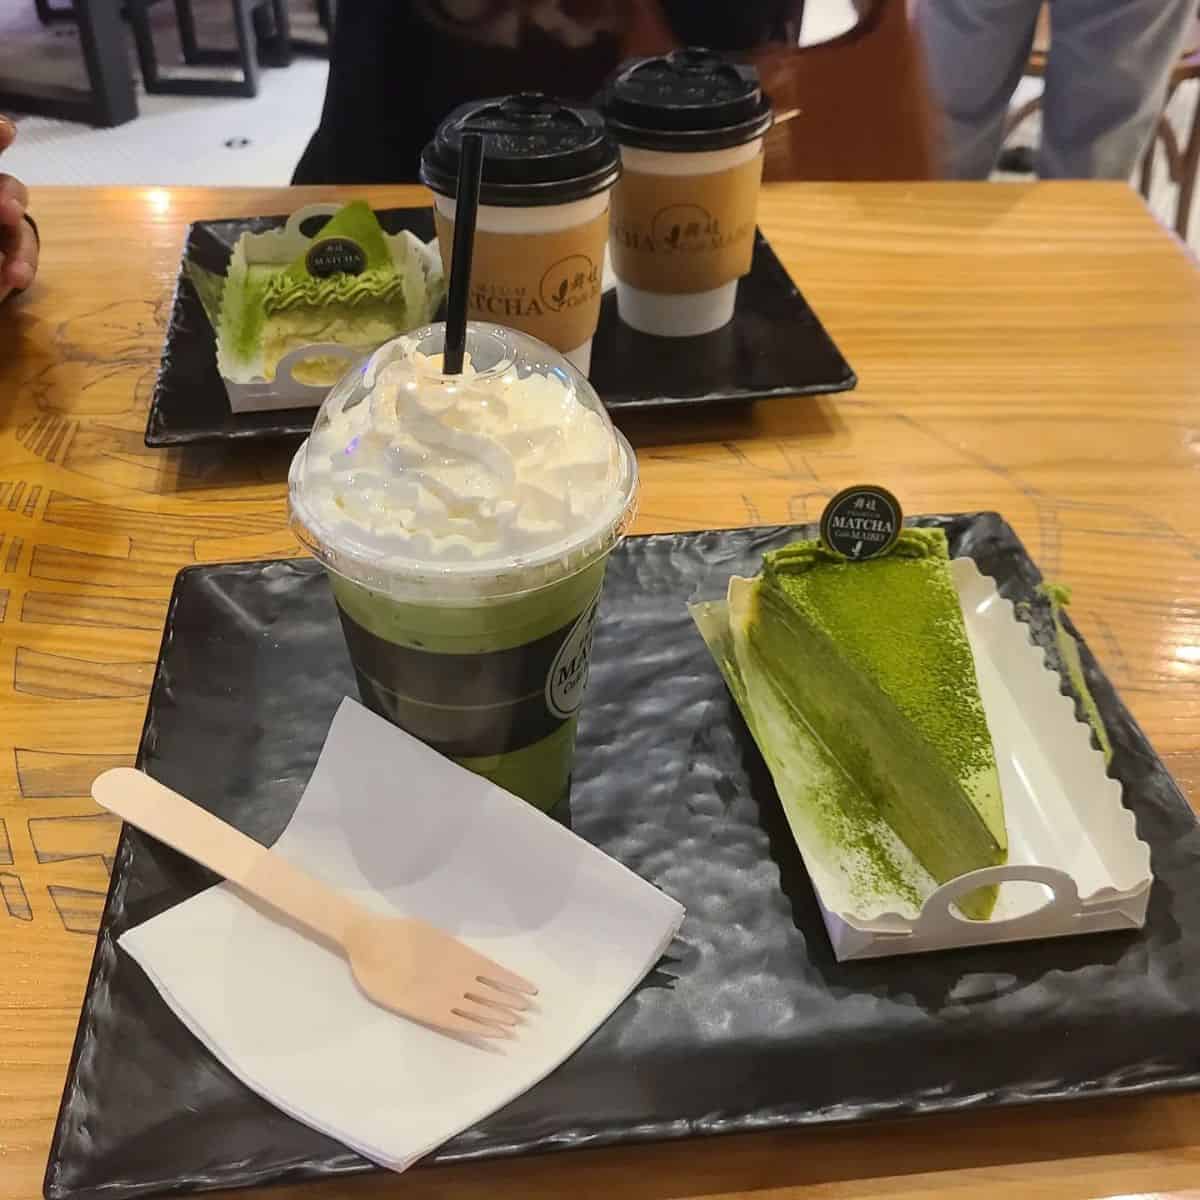 A delicious combination of healthy snacks in green colour inside a cafe